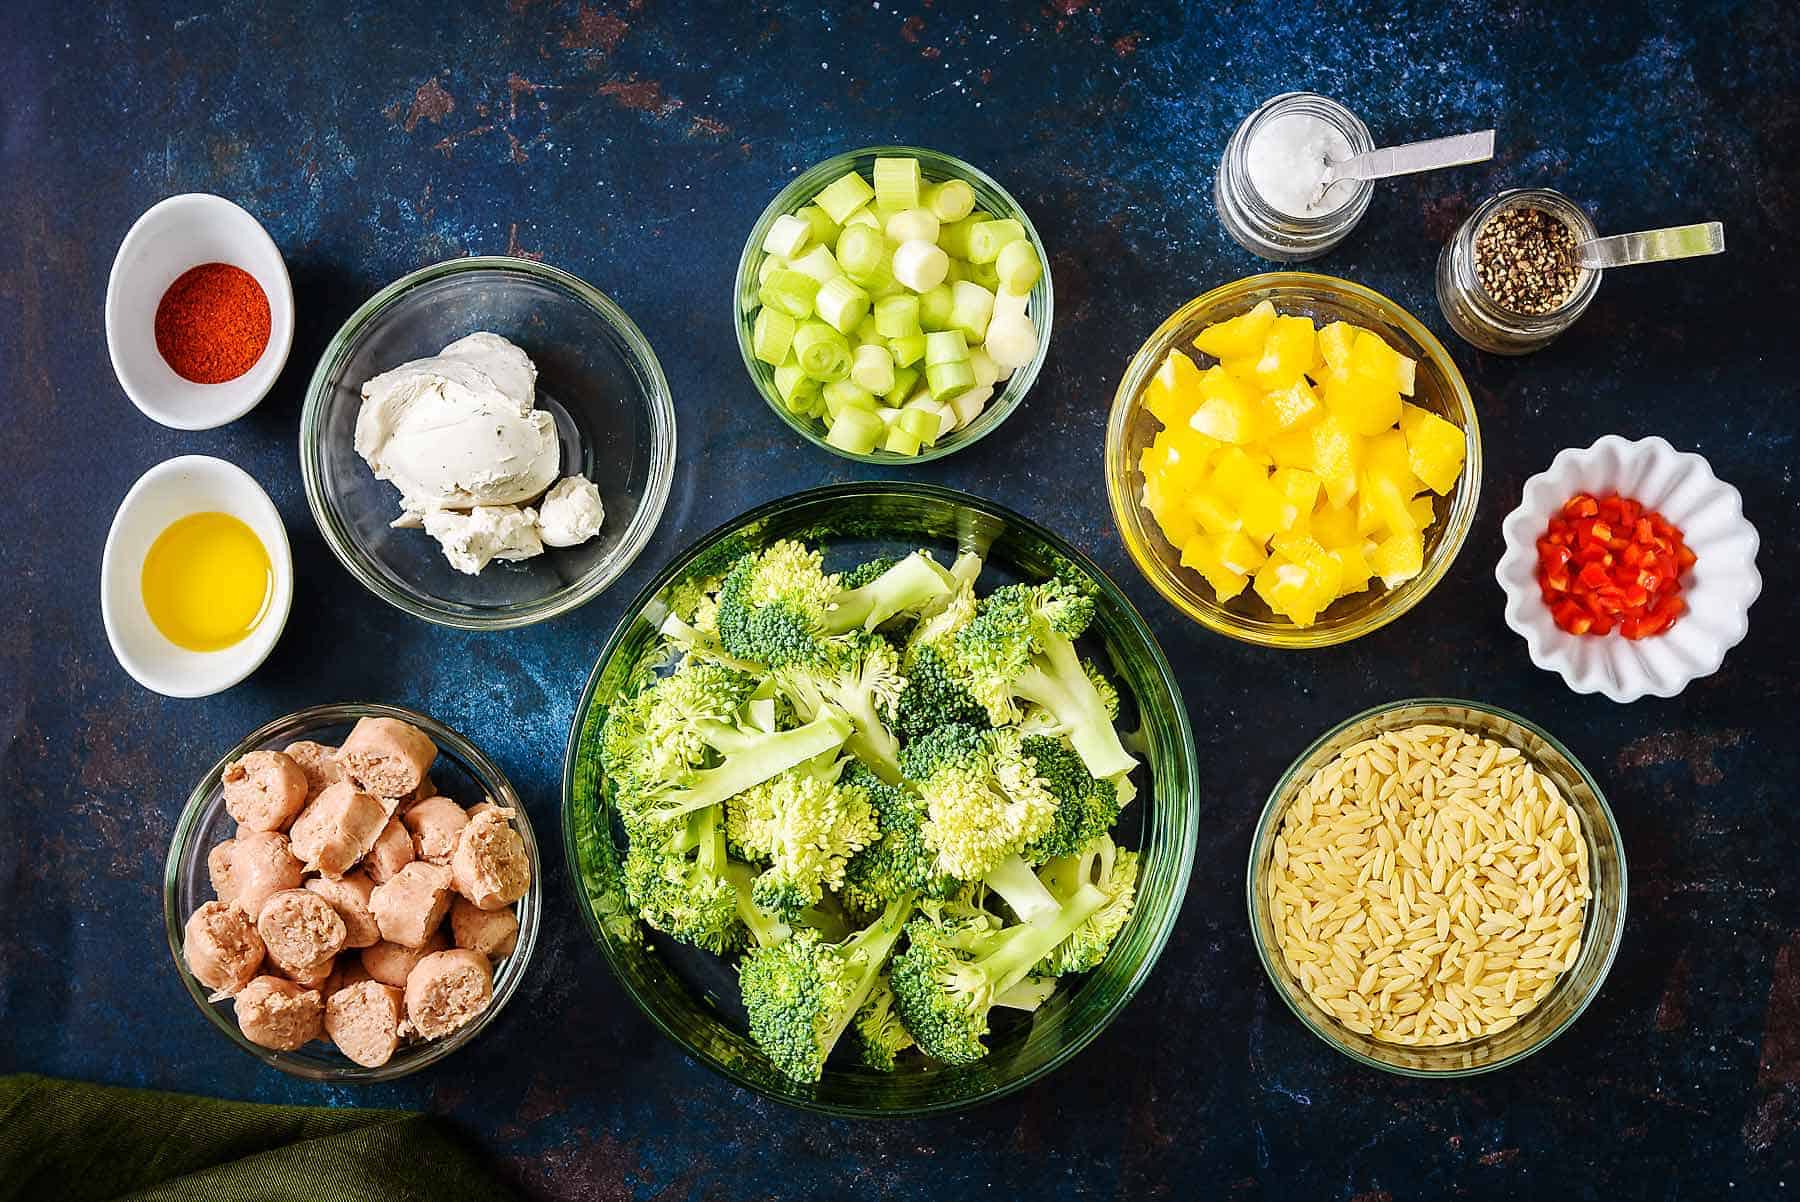 Ingredients for sausage and broccoli one-pan